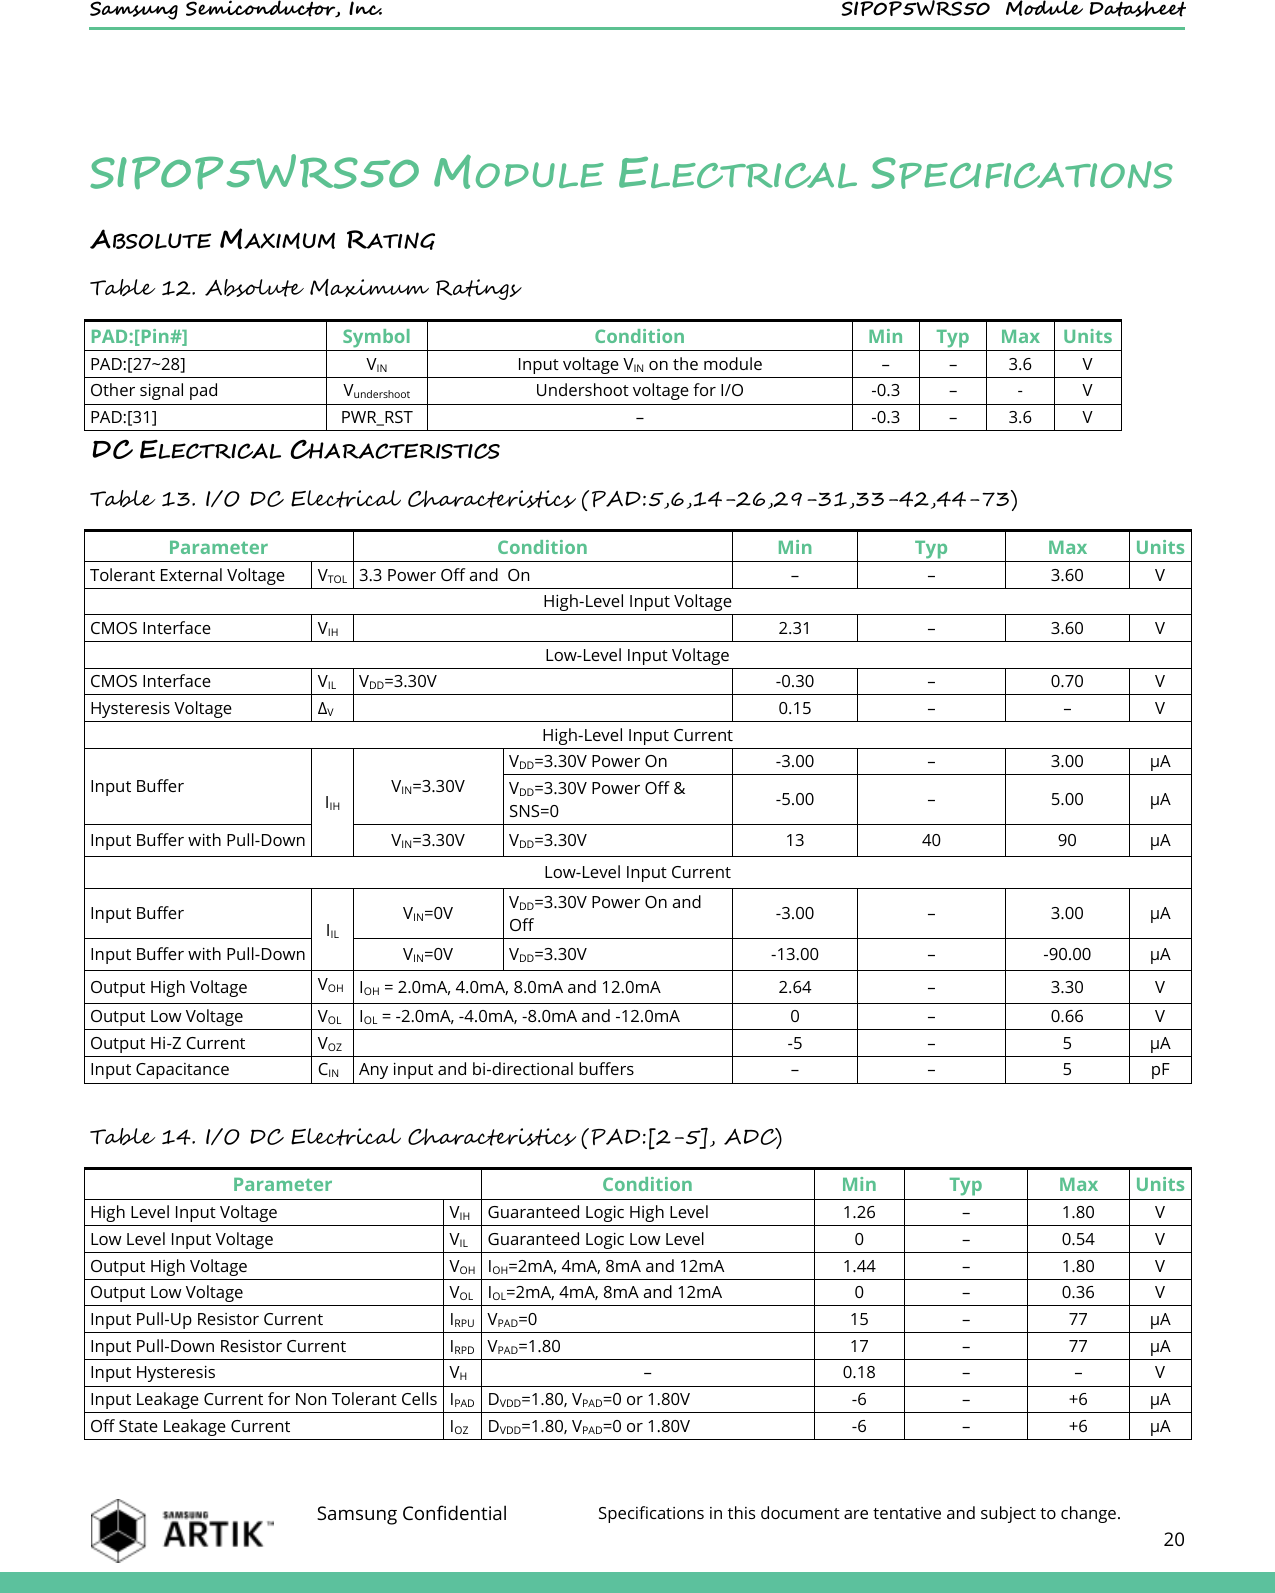    Samsung Semiconductor, Inc.  SIP0P5WRS50  Module Datasheet    Samsung Confidential Specifications in this document are tentative and subject to change.  20    SIP0P5WRS50 MODULE ELECTRICAL SPECIFICATIONS ABSOLUTE MAXIMUM RATING Table 12. Absolute Maximum Ratings PAD:[Pin#] Symbol Condition Min Typ Max Units PAD:[27~28] VIN Input voltage VIN on the module – – 3.6 V Other signal pad Vundershoot Undershoot voltage for I/O -0.3 – - V PAD:[31] PWR_RST – -0.3 – 3.6 V DC ELECTRICAL CHARACTERISTICS Table 13. I/O DC Electrical Characteristics (PAD:5,6,14-26,29-31,33-42,44-73) Parameter Condition Min Typ Max Units Tolerant External Voltage VTOL 3.3 Power Off and  On – – 3.60 V High-Level Input Voltage CMOS Interface VIH  2.31 – 3.60 V Low-Level Input Voltage CMOS Interface VIL VDD=3.30V -0.30 – 0.70 V Hysteresis Voltage ΔV  0.15 – – V High-Level Input Current Input Buffer IIH VIN=3.30V VDD=3.30V Power On -3.00 – 3.00 µA VDD=3.30V Power Off &amp; SNS=0 -5.00 – 5.00 µA Input Buffer with Pull-Down VIN=3.30V VDD=3.30V 13 40 90 µA Low-Level Input Current Input Buffer IIL VIN=0V VDD=3.30V Power On and Off -3.00 – 3.00 µA Input Buffer with Pull-Down VIN=0V VDD=3.30V -13.00 – -90.00 µA Output High Voltage VOH IOH = 2.0mA, 4.0mA, 8.0mA and 12.0mA 2.64 – 3.30 V Output Low Voltage VOL IOL = -2.0mA, -4.0mA, -8.0mA and -12.0mA 0 – 0.66 V Output Hi-Z Current VOZ  -5 – 5 µA Input Capacitance CIN Any input and bi-directional buffers – – 5 pF  Table 14. I/O DC Electrical Characteristics (PAD:[2-5], ADC) Parameter Condition Min Typ Max Units High Level Input Voltage VIH Guaranteed Logic High Level 1.26 – 1.80 V Low Level Input Voltage VIL Guaranteed Logic Low Level 0 – 0.54 V Output High Voltage VOH IOH=2mA, 4mA, 8mA and 12mA 1.44 – 1.80 V Output Low Voltage VOL IOL=2mA, 4mA, 8mA and 12mA 0 – 0.36 V Input Pull-Up Resistor Current IRPU VPAD=0 15 – 77 µA Input Pull-Down Resistor Current IRPD VPAD=1.80 17 – 77 µA Input Hysteresis VH – 0.18 – – V Input Leakage Current for Non Tolerant Cells IPAD DVDD=1.80, VPAD=0 or 1.80V -6 – +6 µA Off State Leakage Current IOZ DVDD=1.80, VPAD=0 or 1.80V -6 – +6 µA 